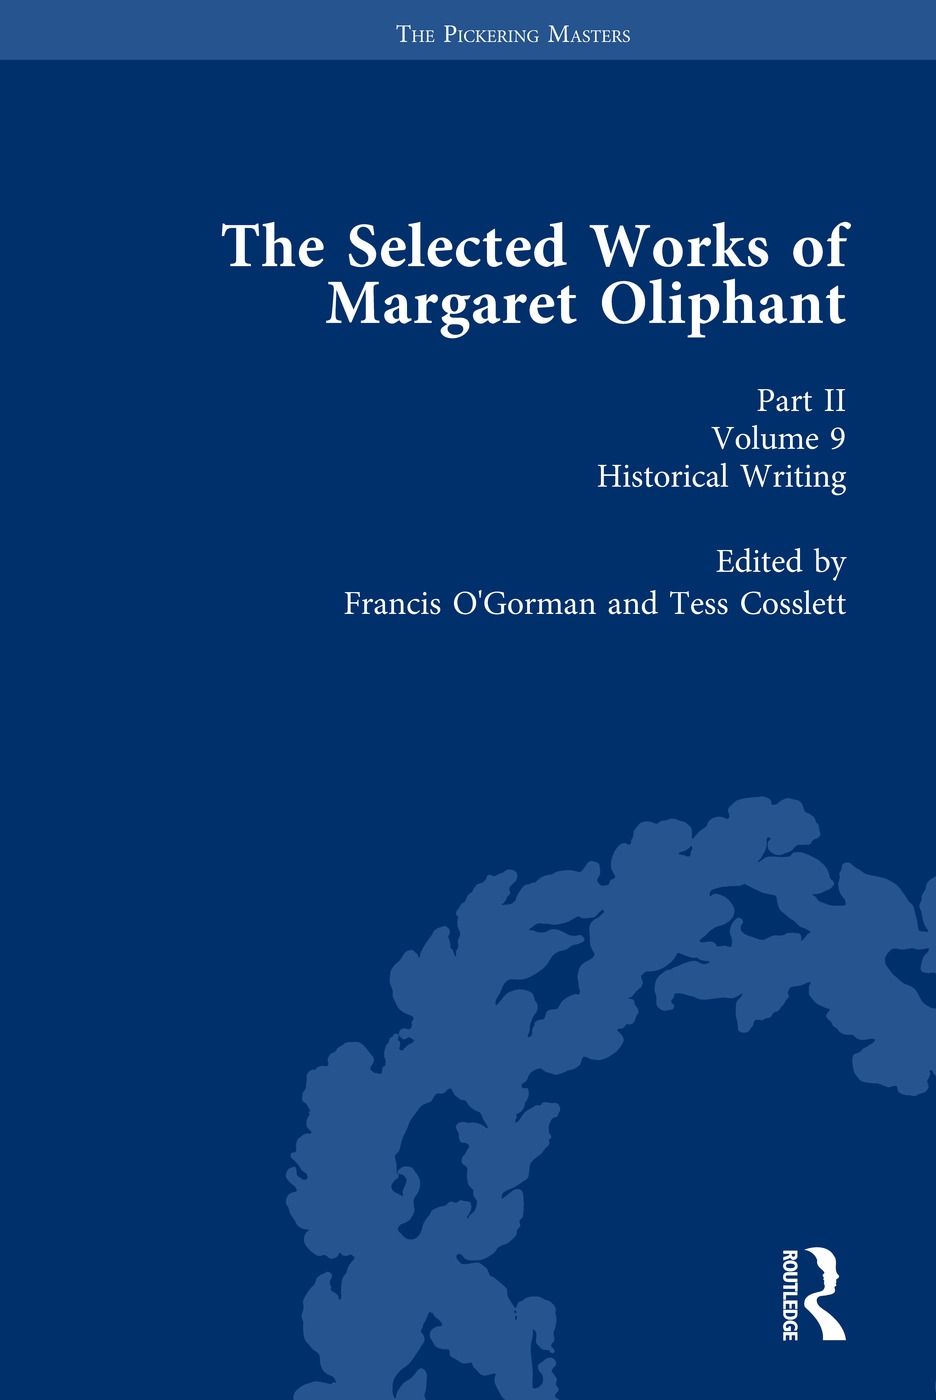 The Selected Works of Margaret Oliphant, Part II Volume 9: Historical Writing